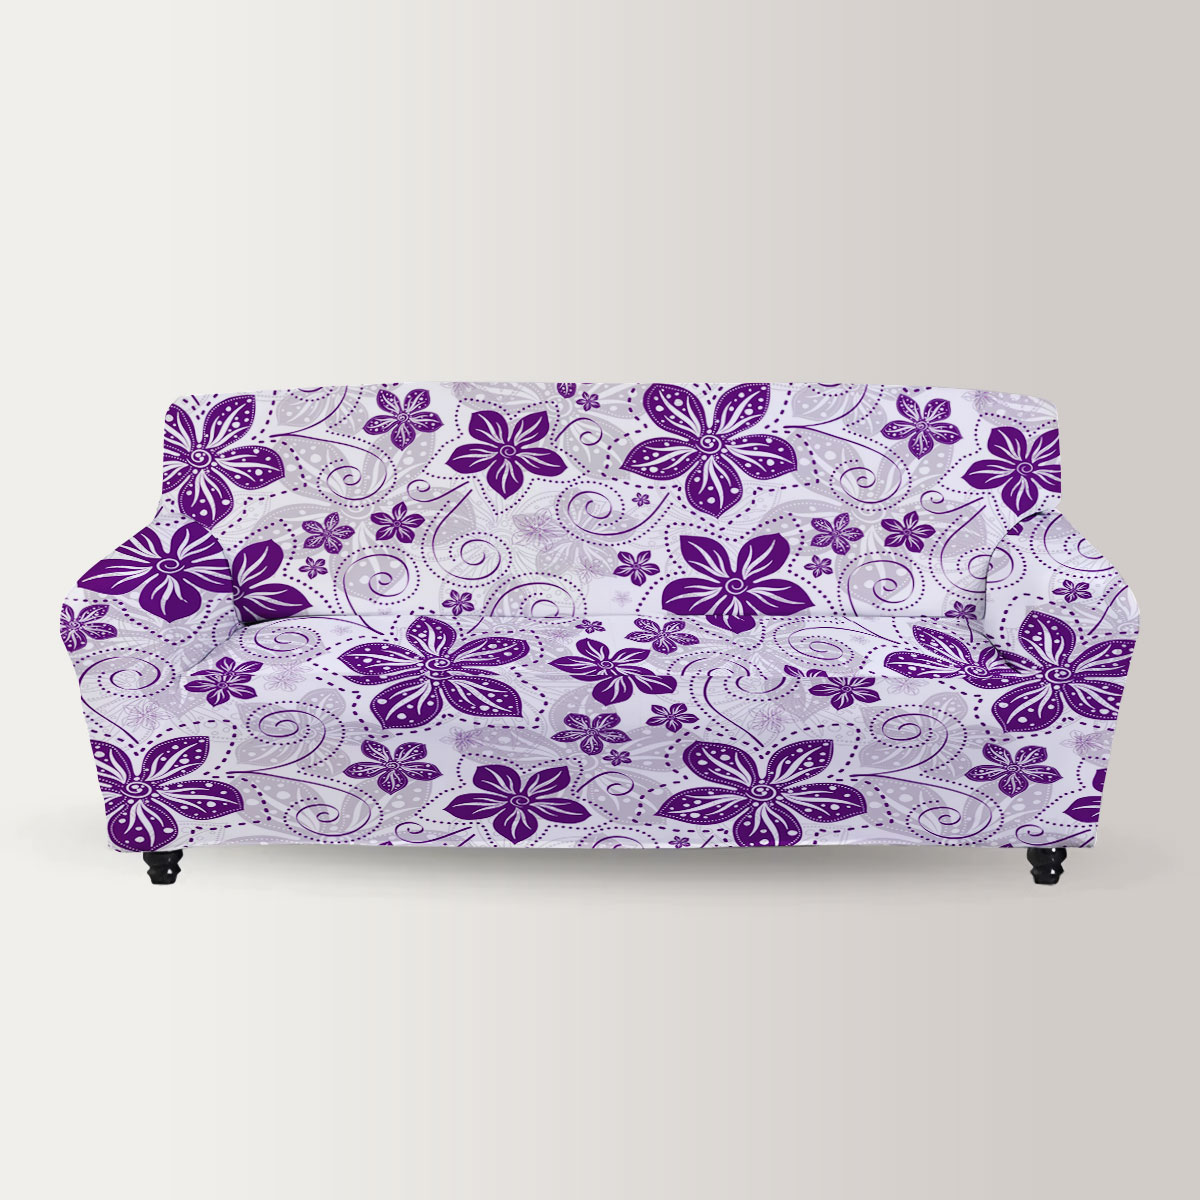 White Violet Floral Pattern Sofa Cover